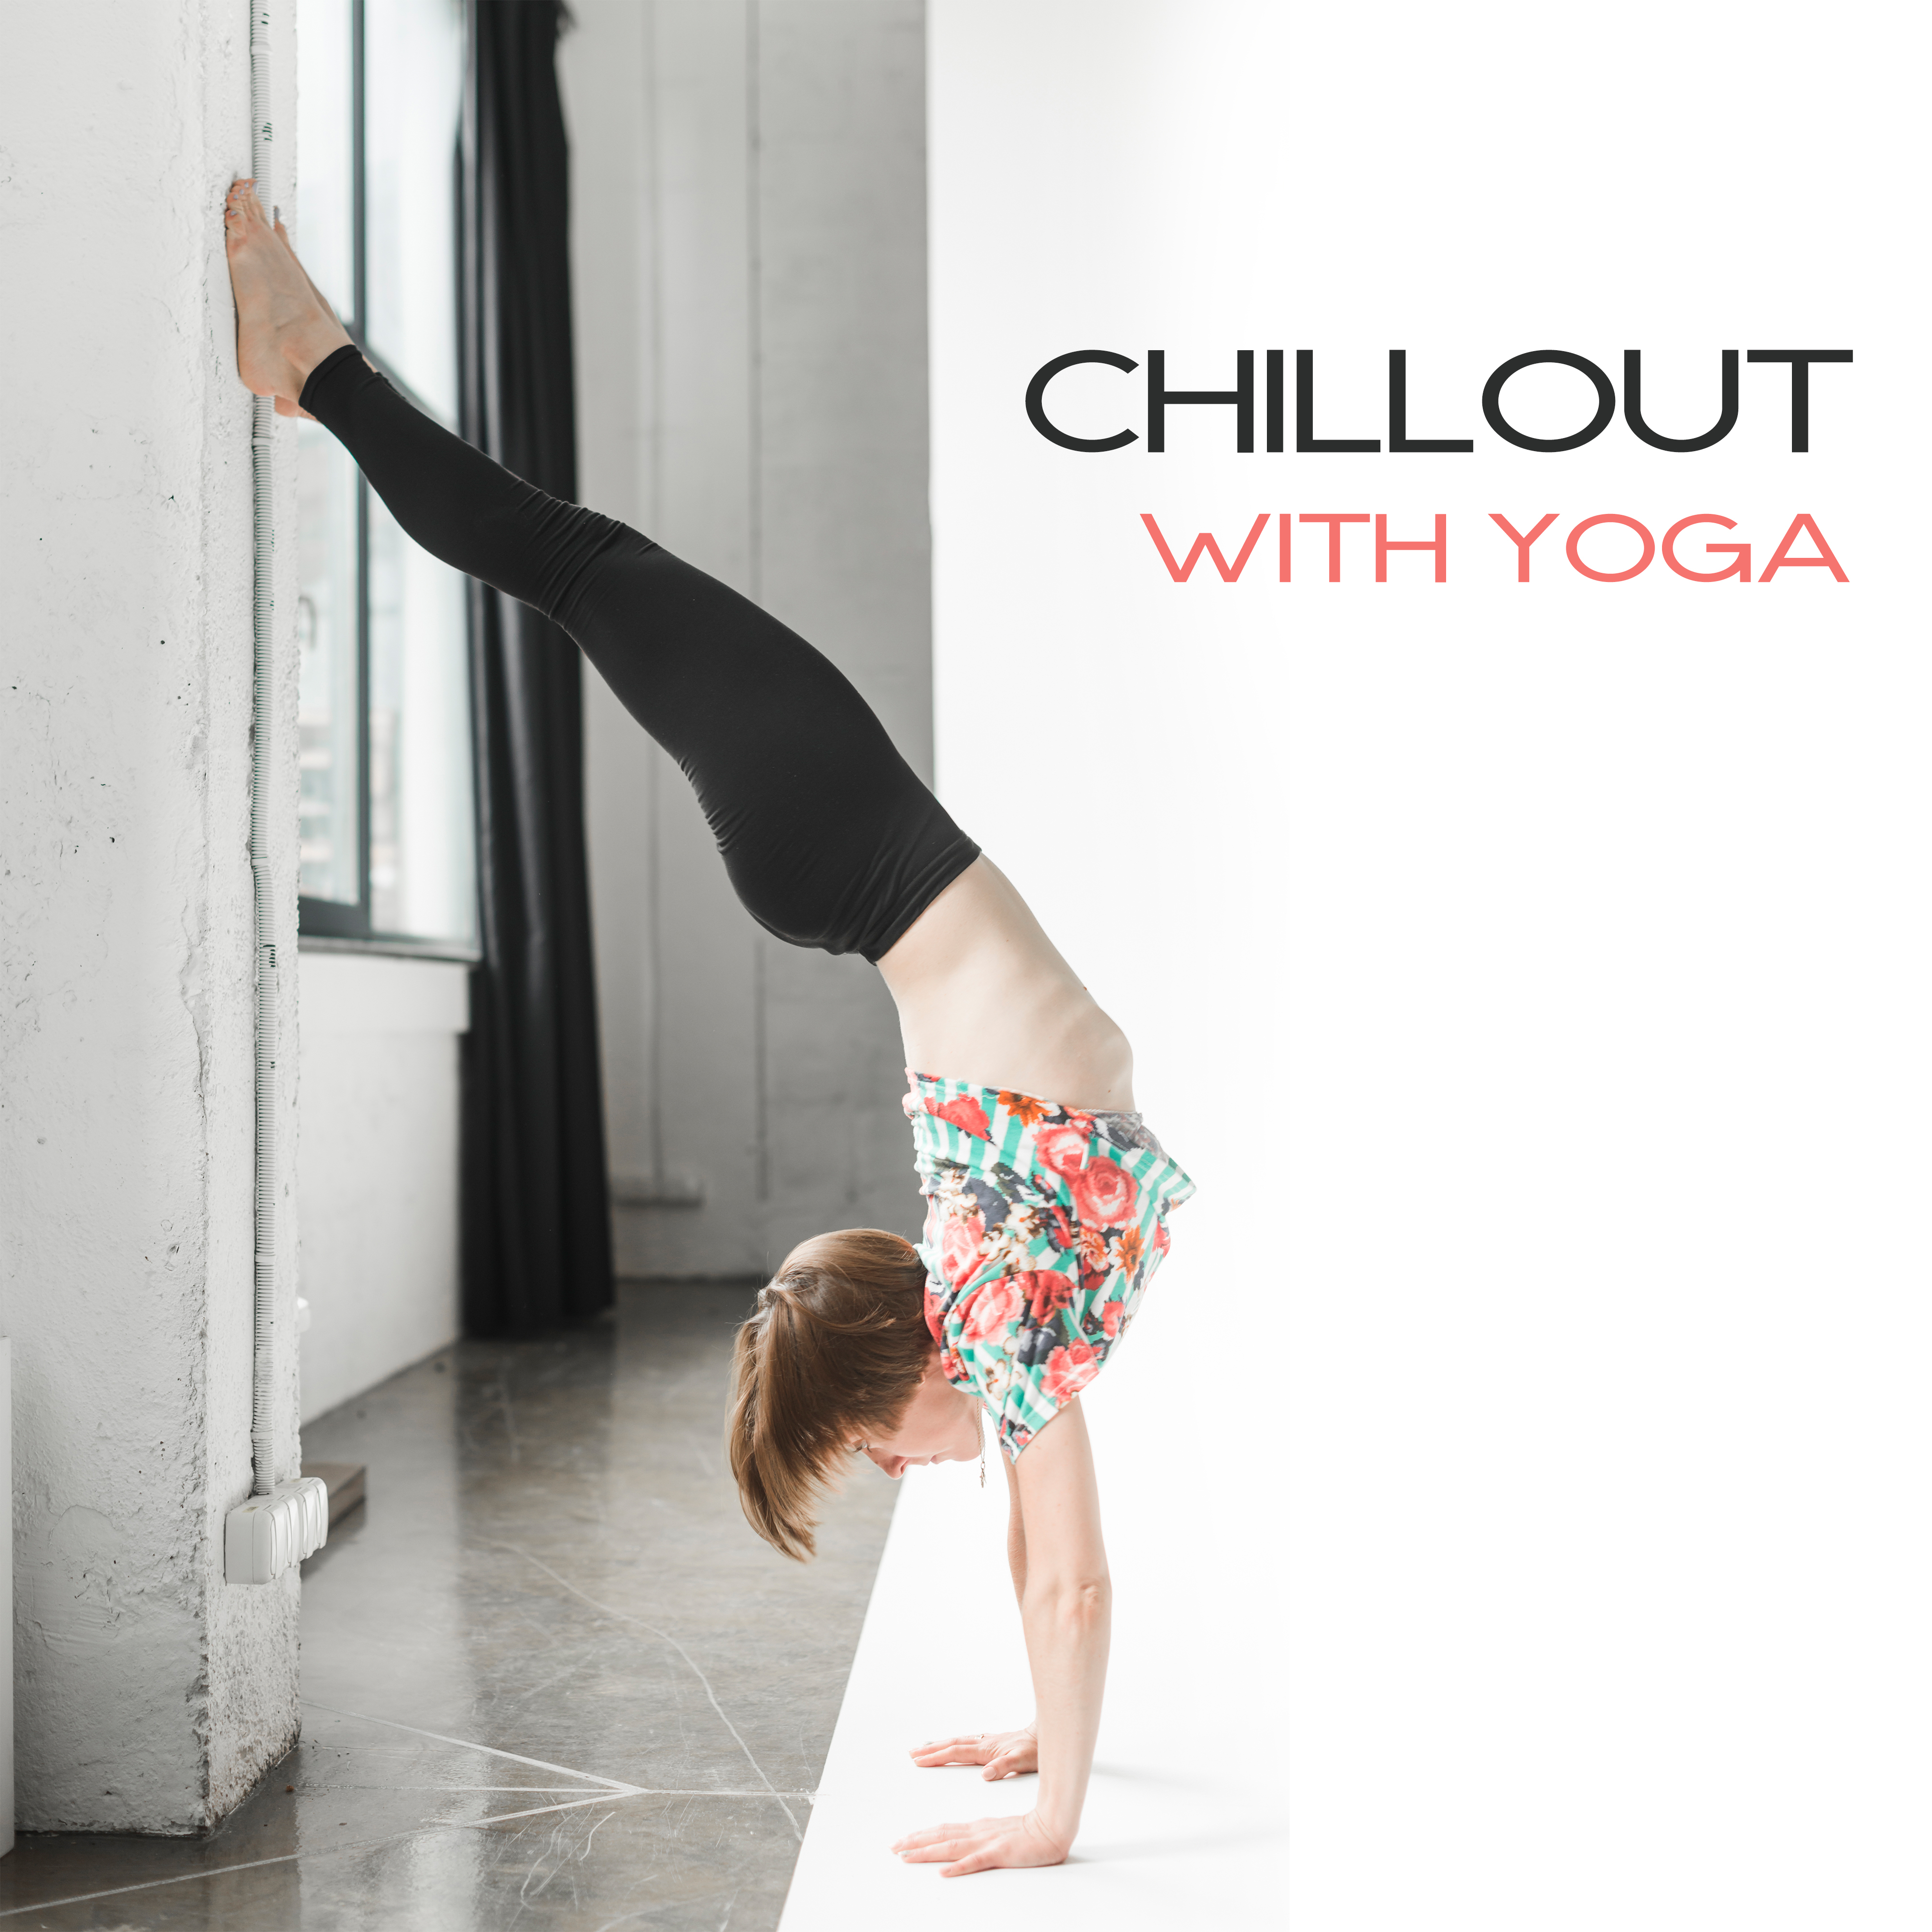 Chillout with Yoga